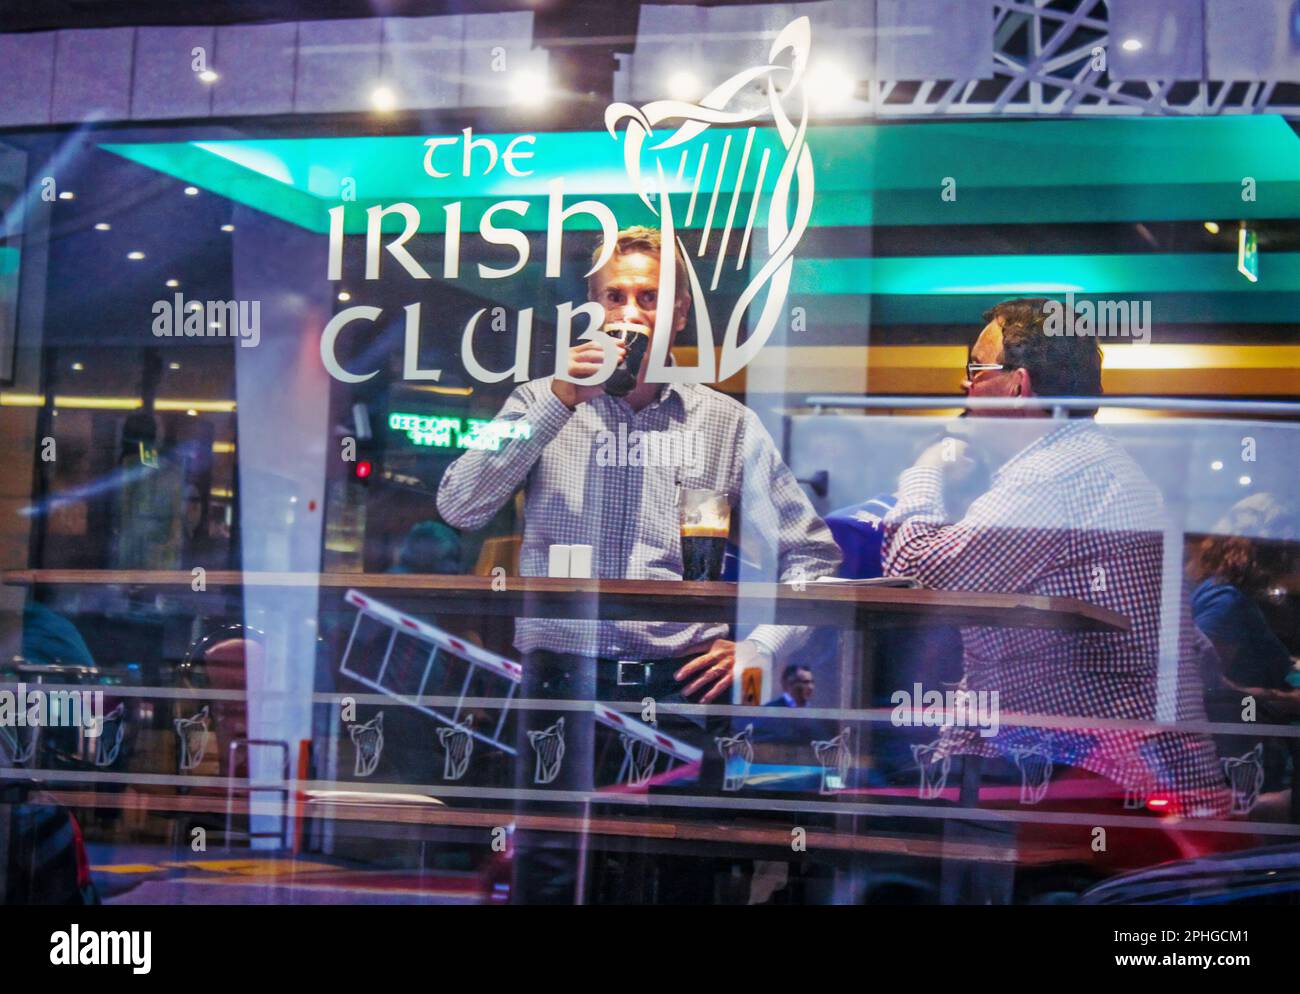 2015- 03 Brisbane Australia - Street Photography into window of Irish club - Two men at table by window drinking dark ale- reflections of city in wind Stock Photo